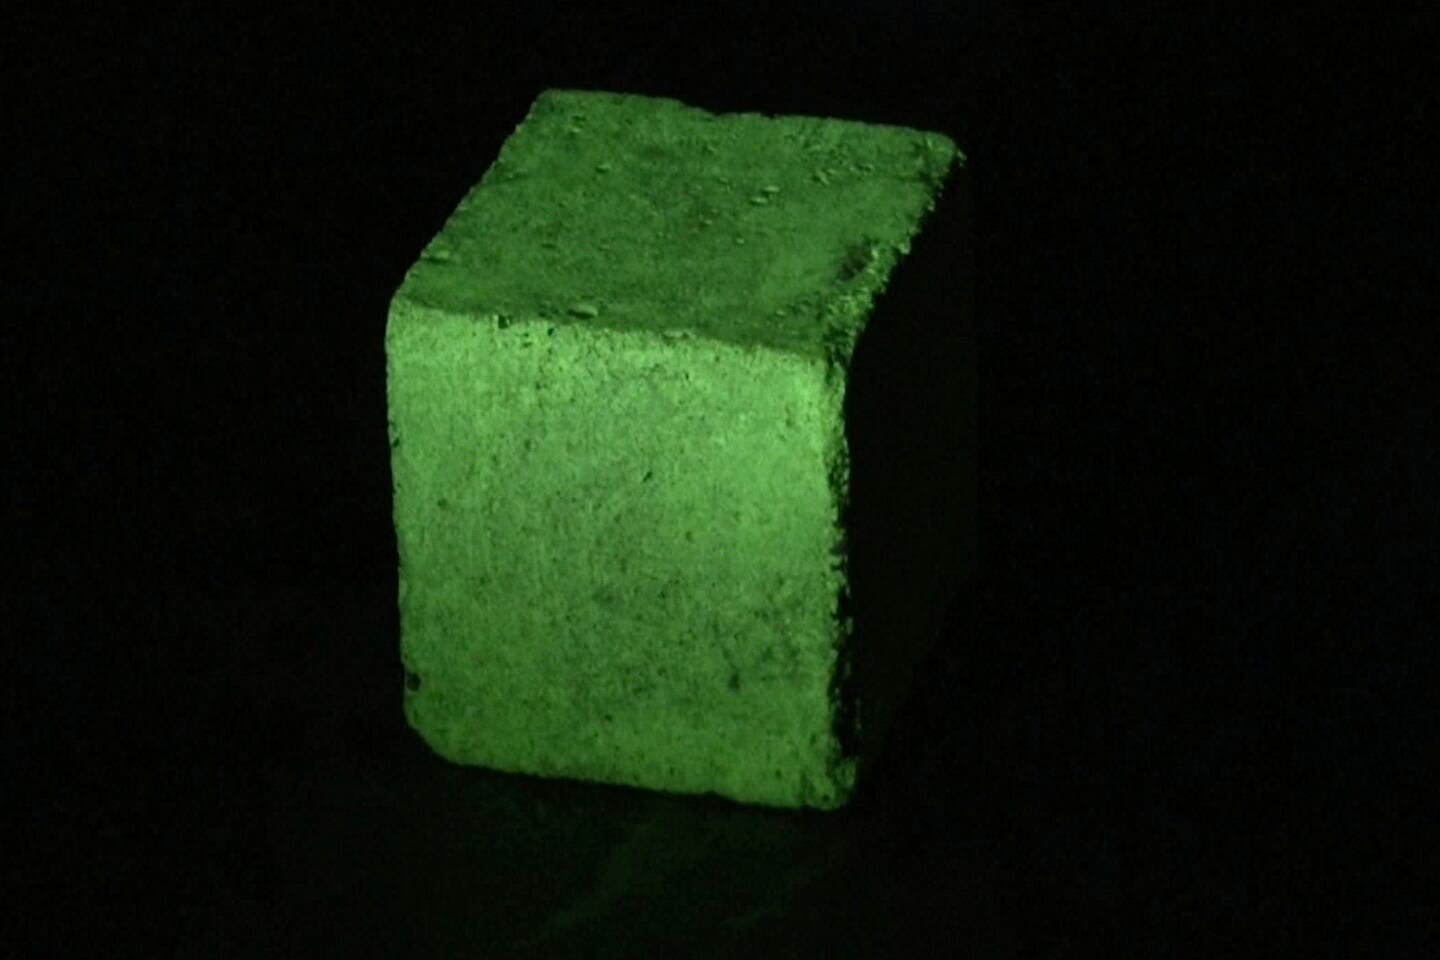 Meet the Egyptian students who invented glow-in-the-dark concrete